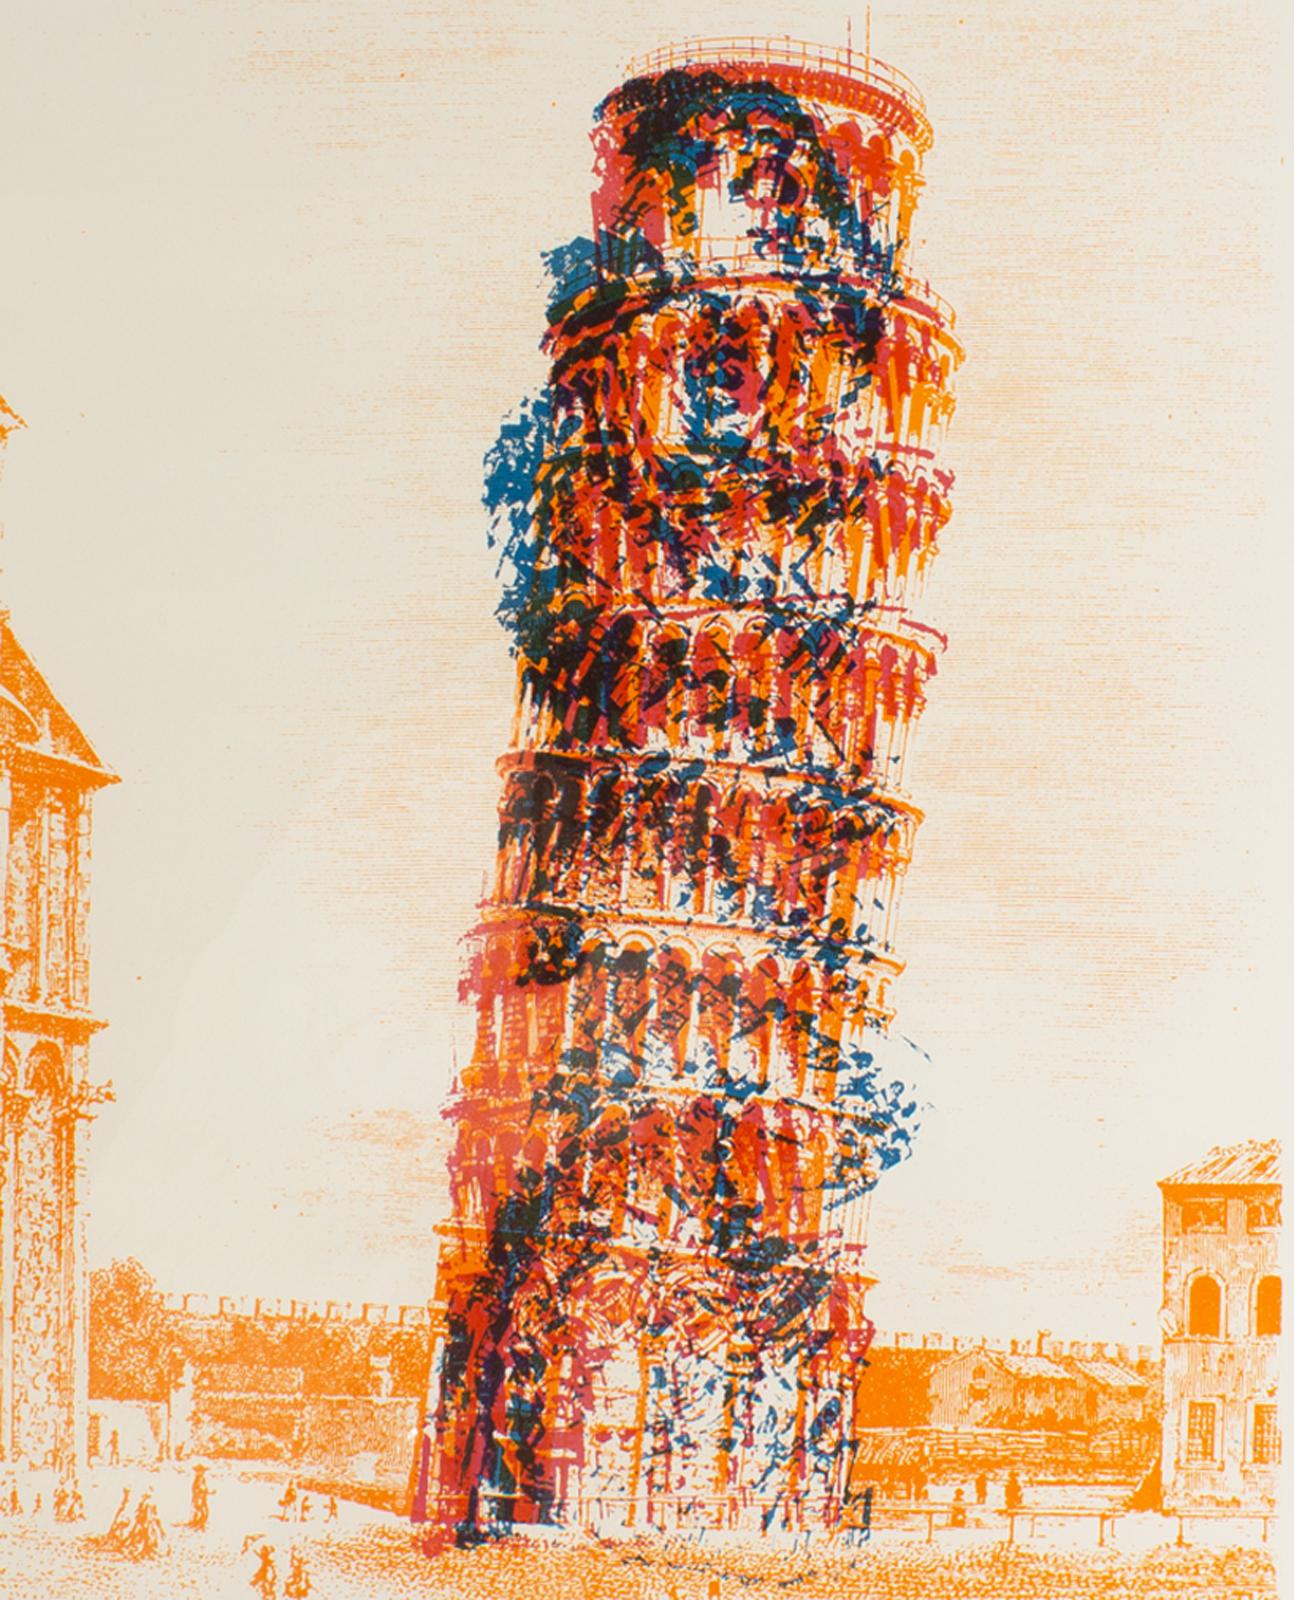 A serigraph depicting the Leaning Tower of Pisa from the Cinetization X series by Belgian artist Pol Bury (1922-2005). Published in 1966 by Lefebre Gallery in New York, Cinetization X included ten serigraph images by Bury depicting famous landmarks.